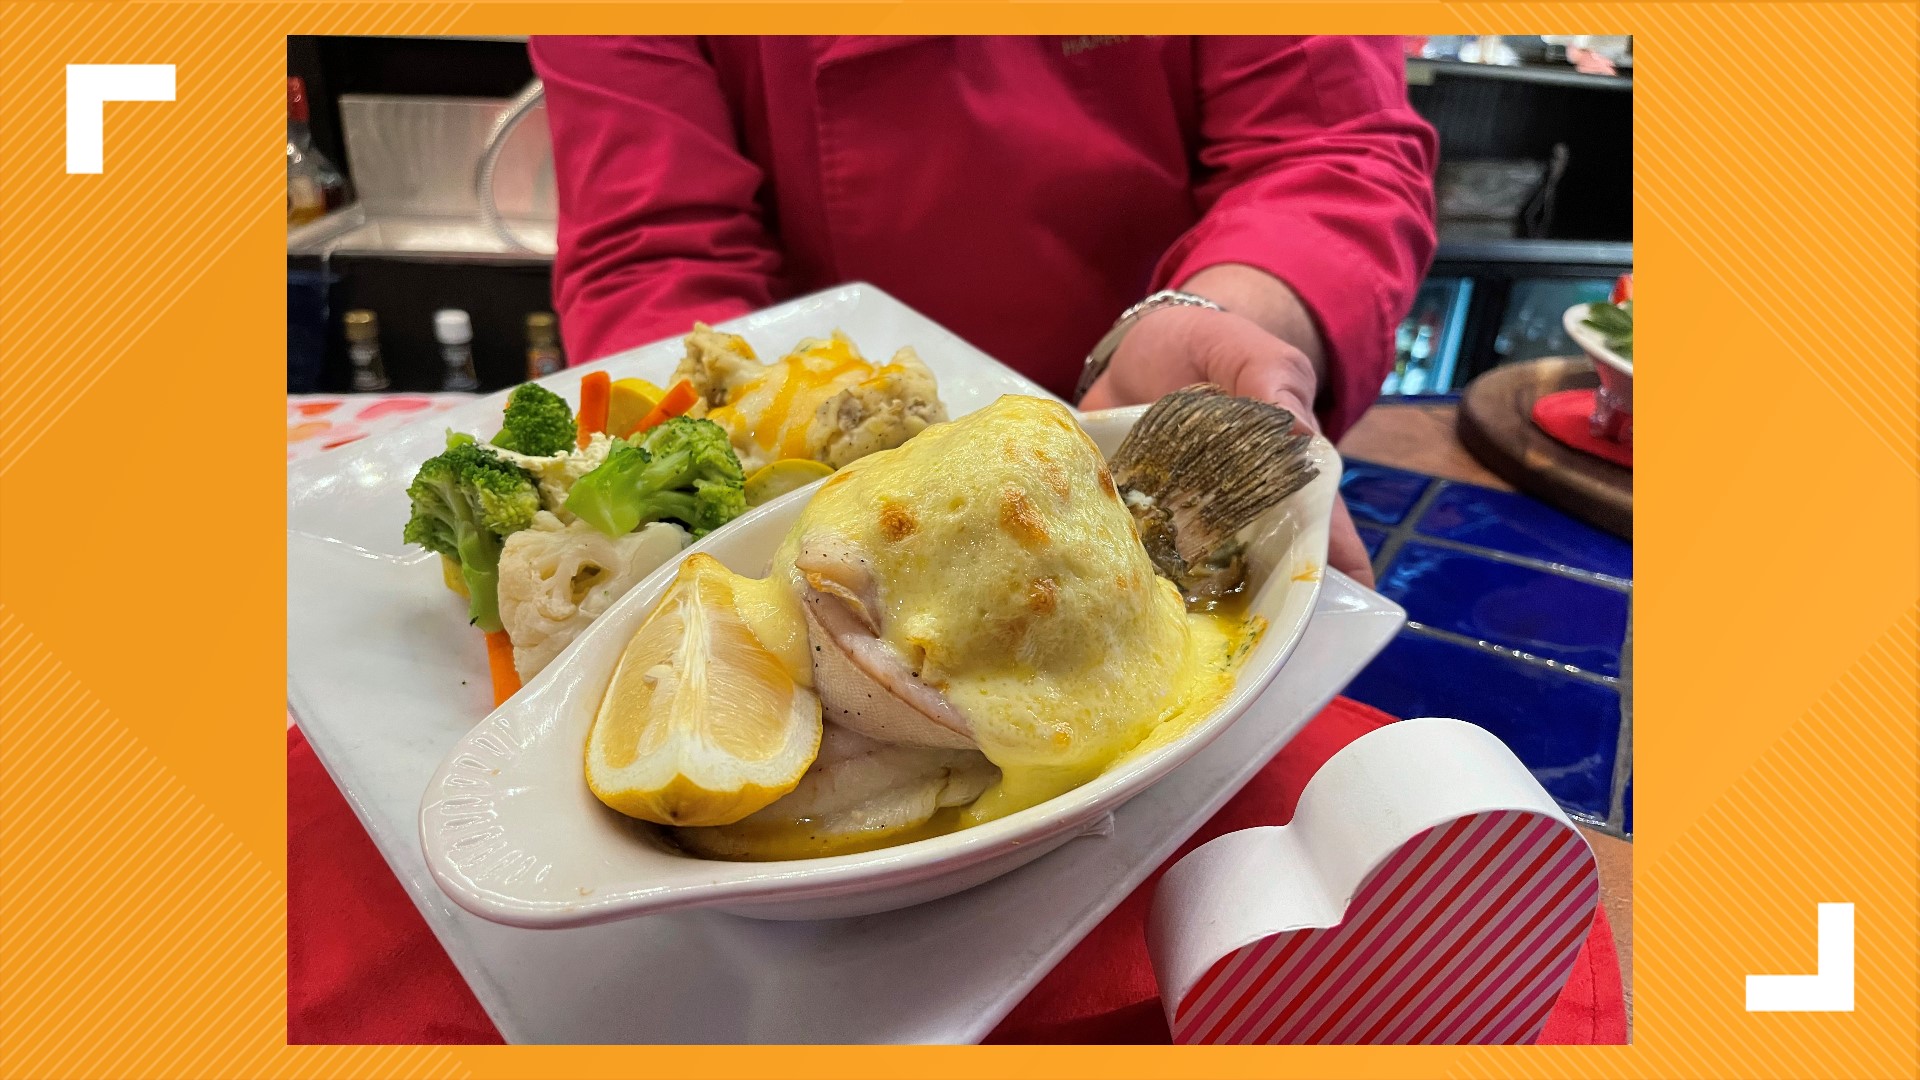 Cupid and his bow are waiting just around the corner as Valentine's Day fast approaches. Taste the love with Olivia's stuffed flounder Imperial and 'kiss'mopolitan.